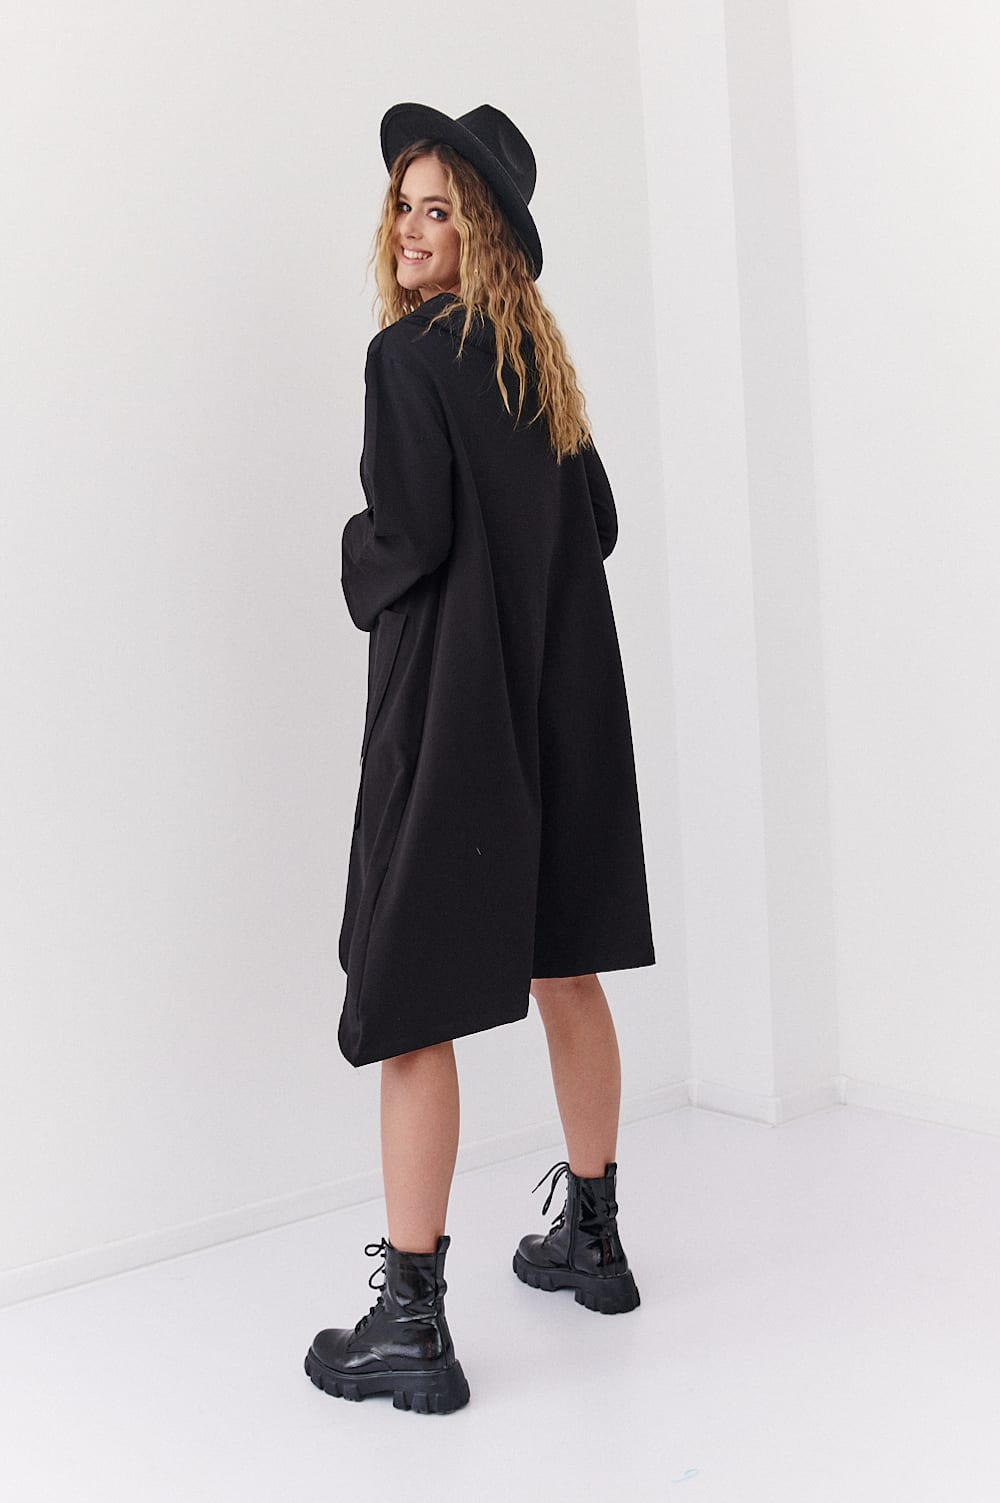 Trapezoidal dress with a wide turtleneck black